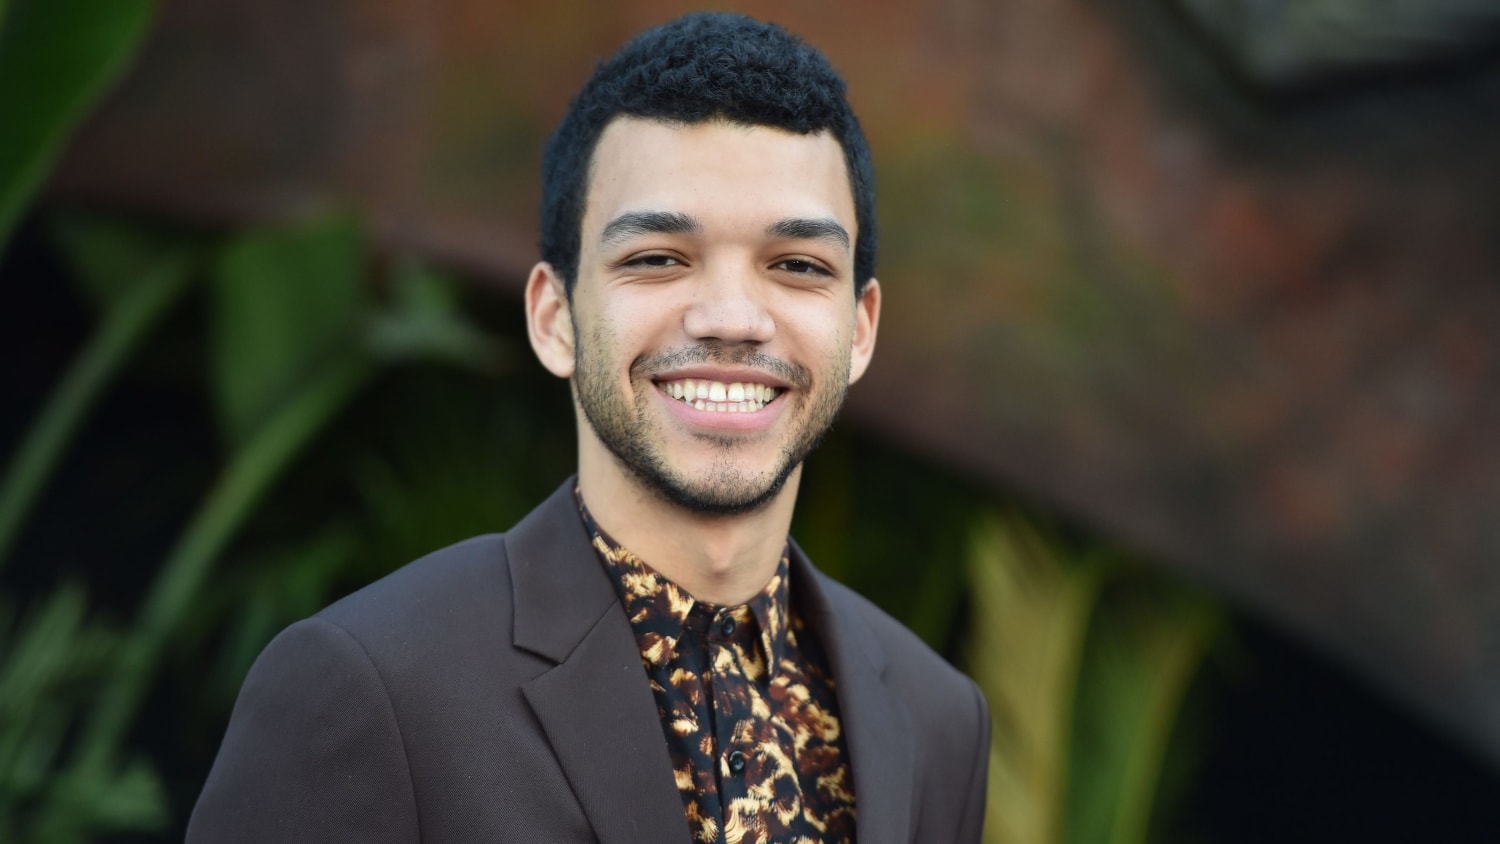 Justice Smith calls for black queer and trans representation in protests, comes out as queer